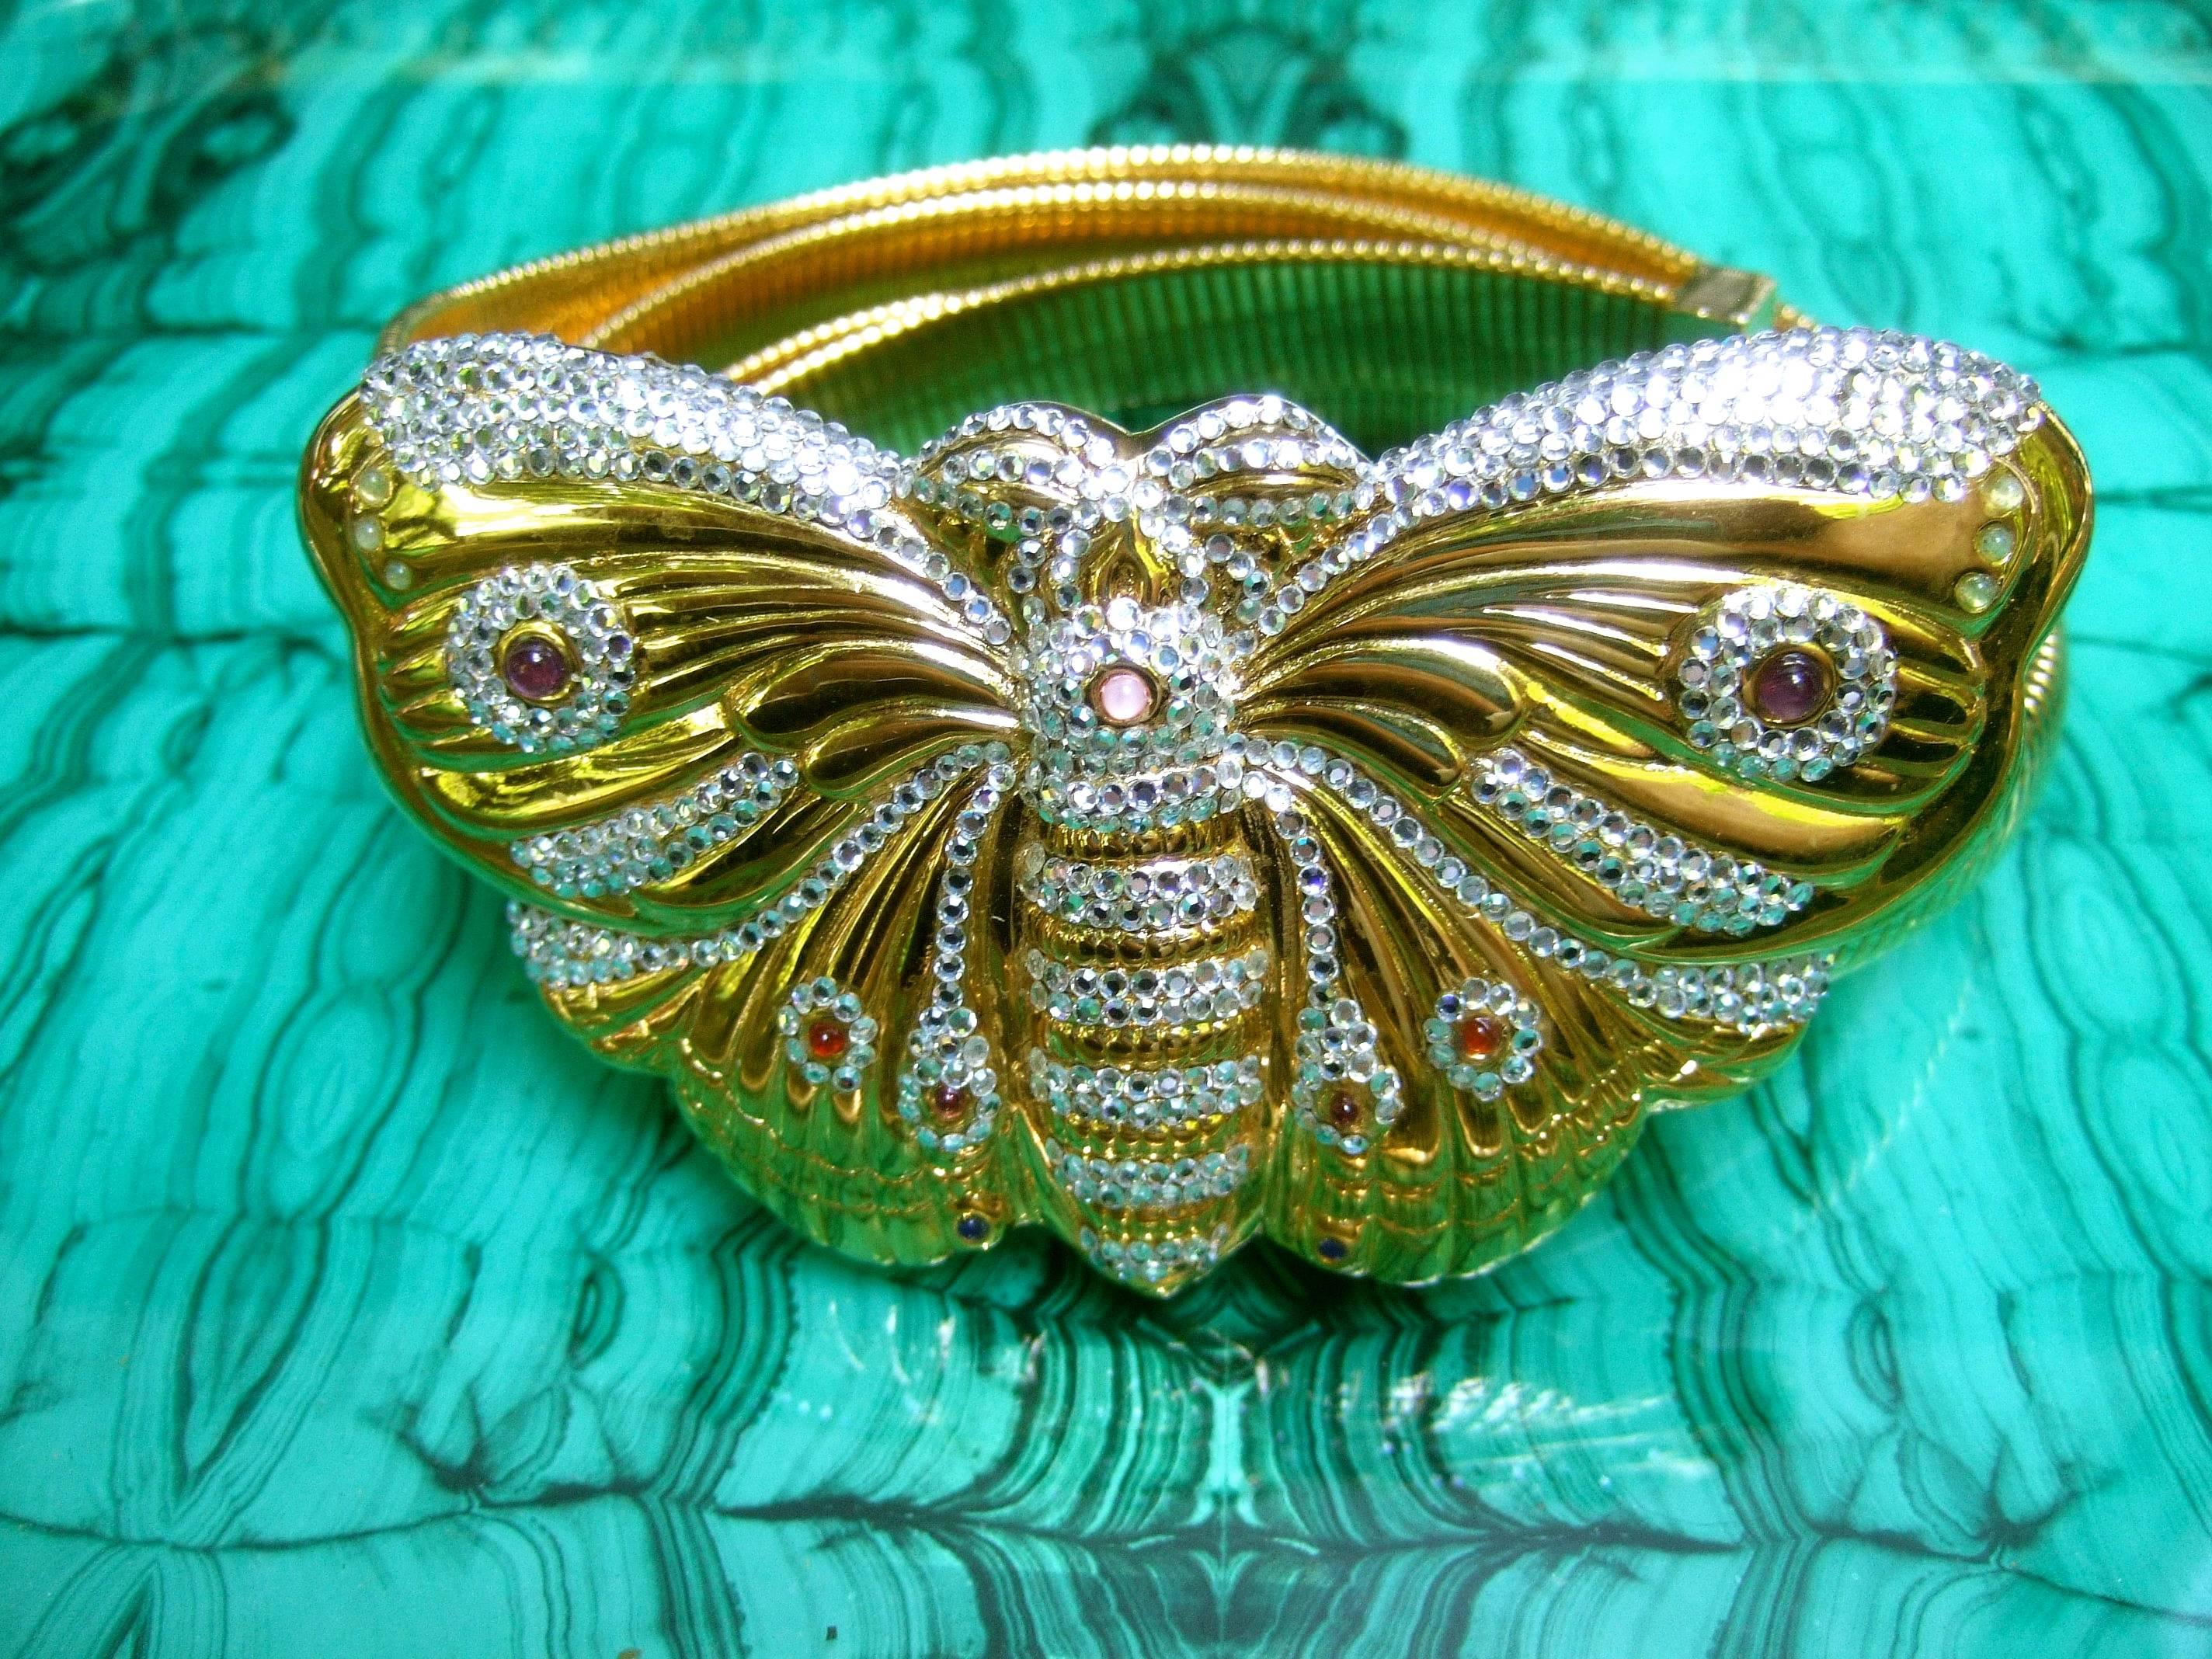 Judith Leiber Exquisite massive jeweled butterfly belt c 1980s
The opulent belt is adorned with a large scale gilt metal 
butterfly buckle encrusted with glittering diamante crystals;
combined with clusters of tiny glass cabochons in a myriad
of